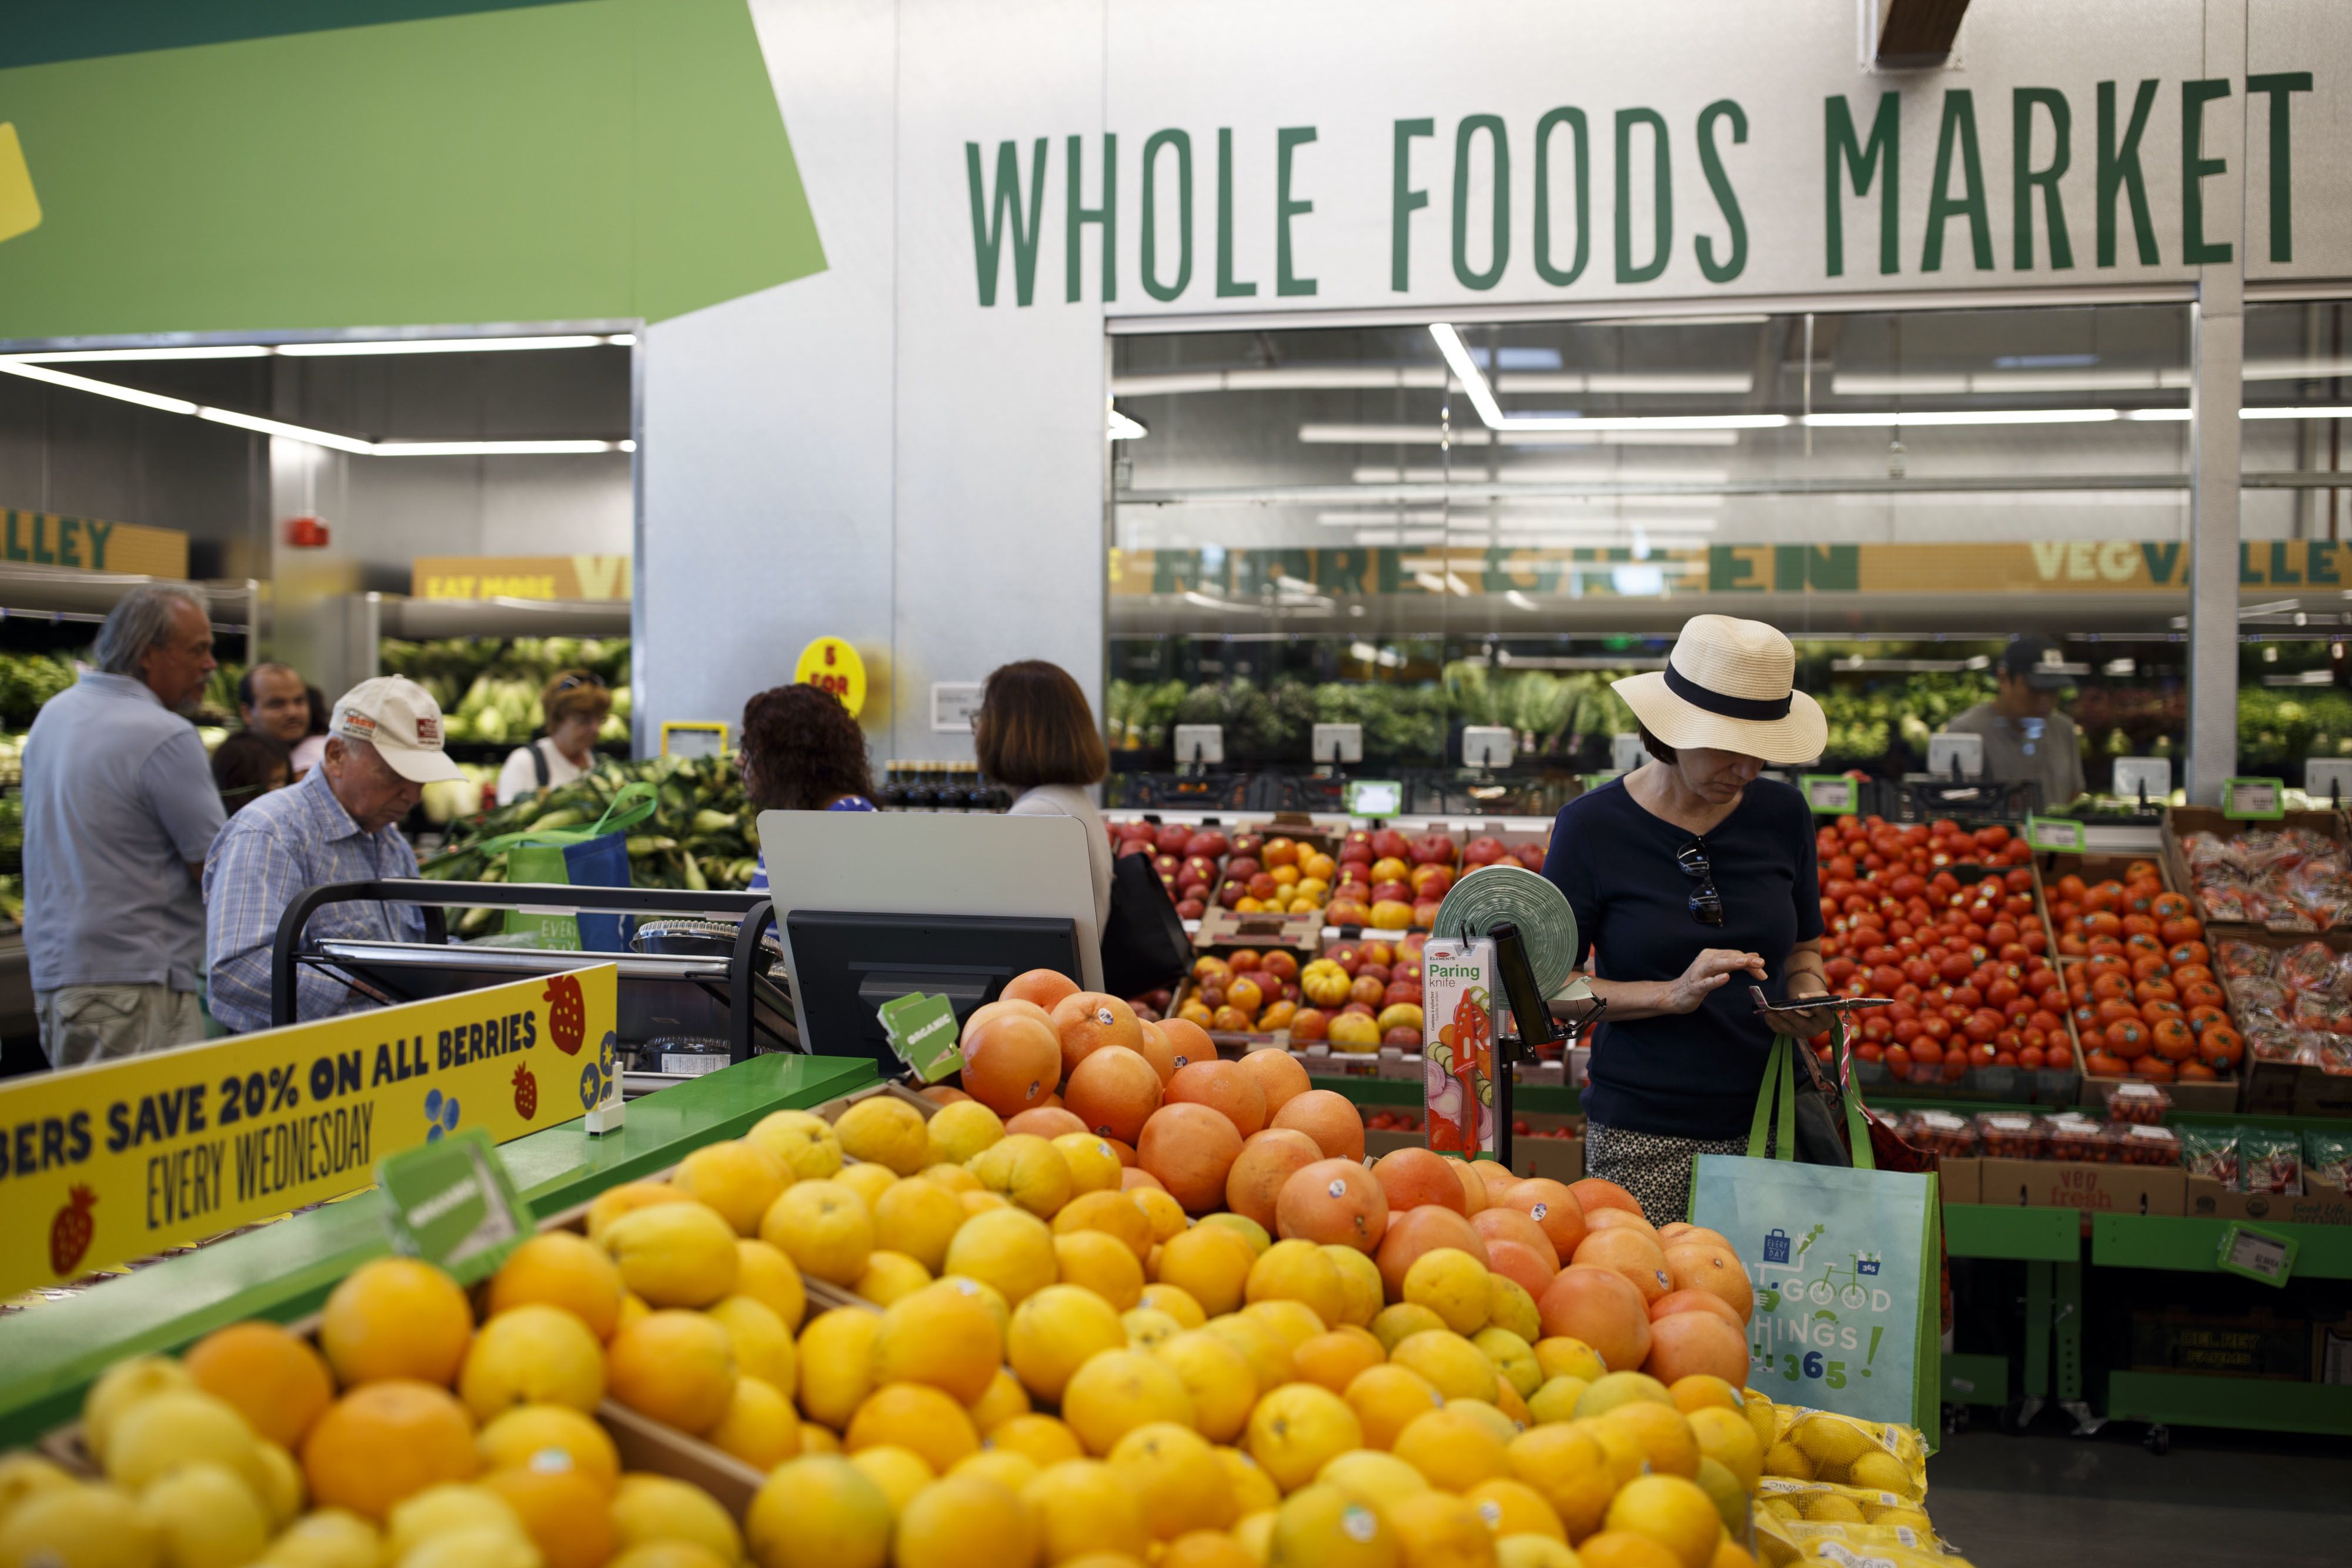 Whole Foods has highest prices despite cuts in April: Bank of America